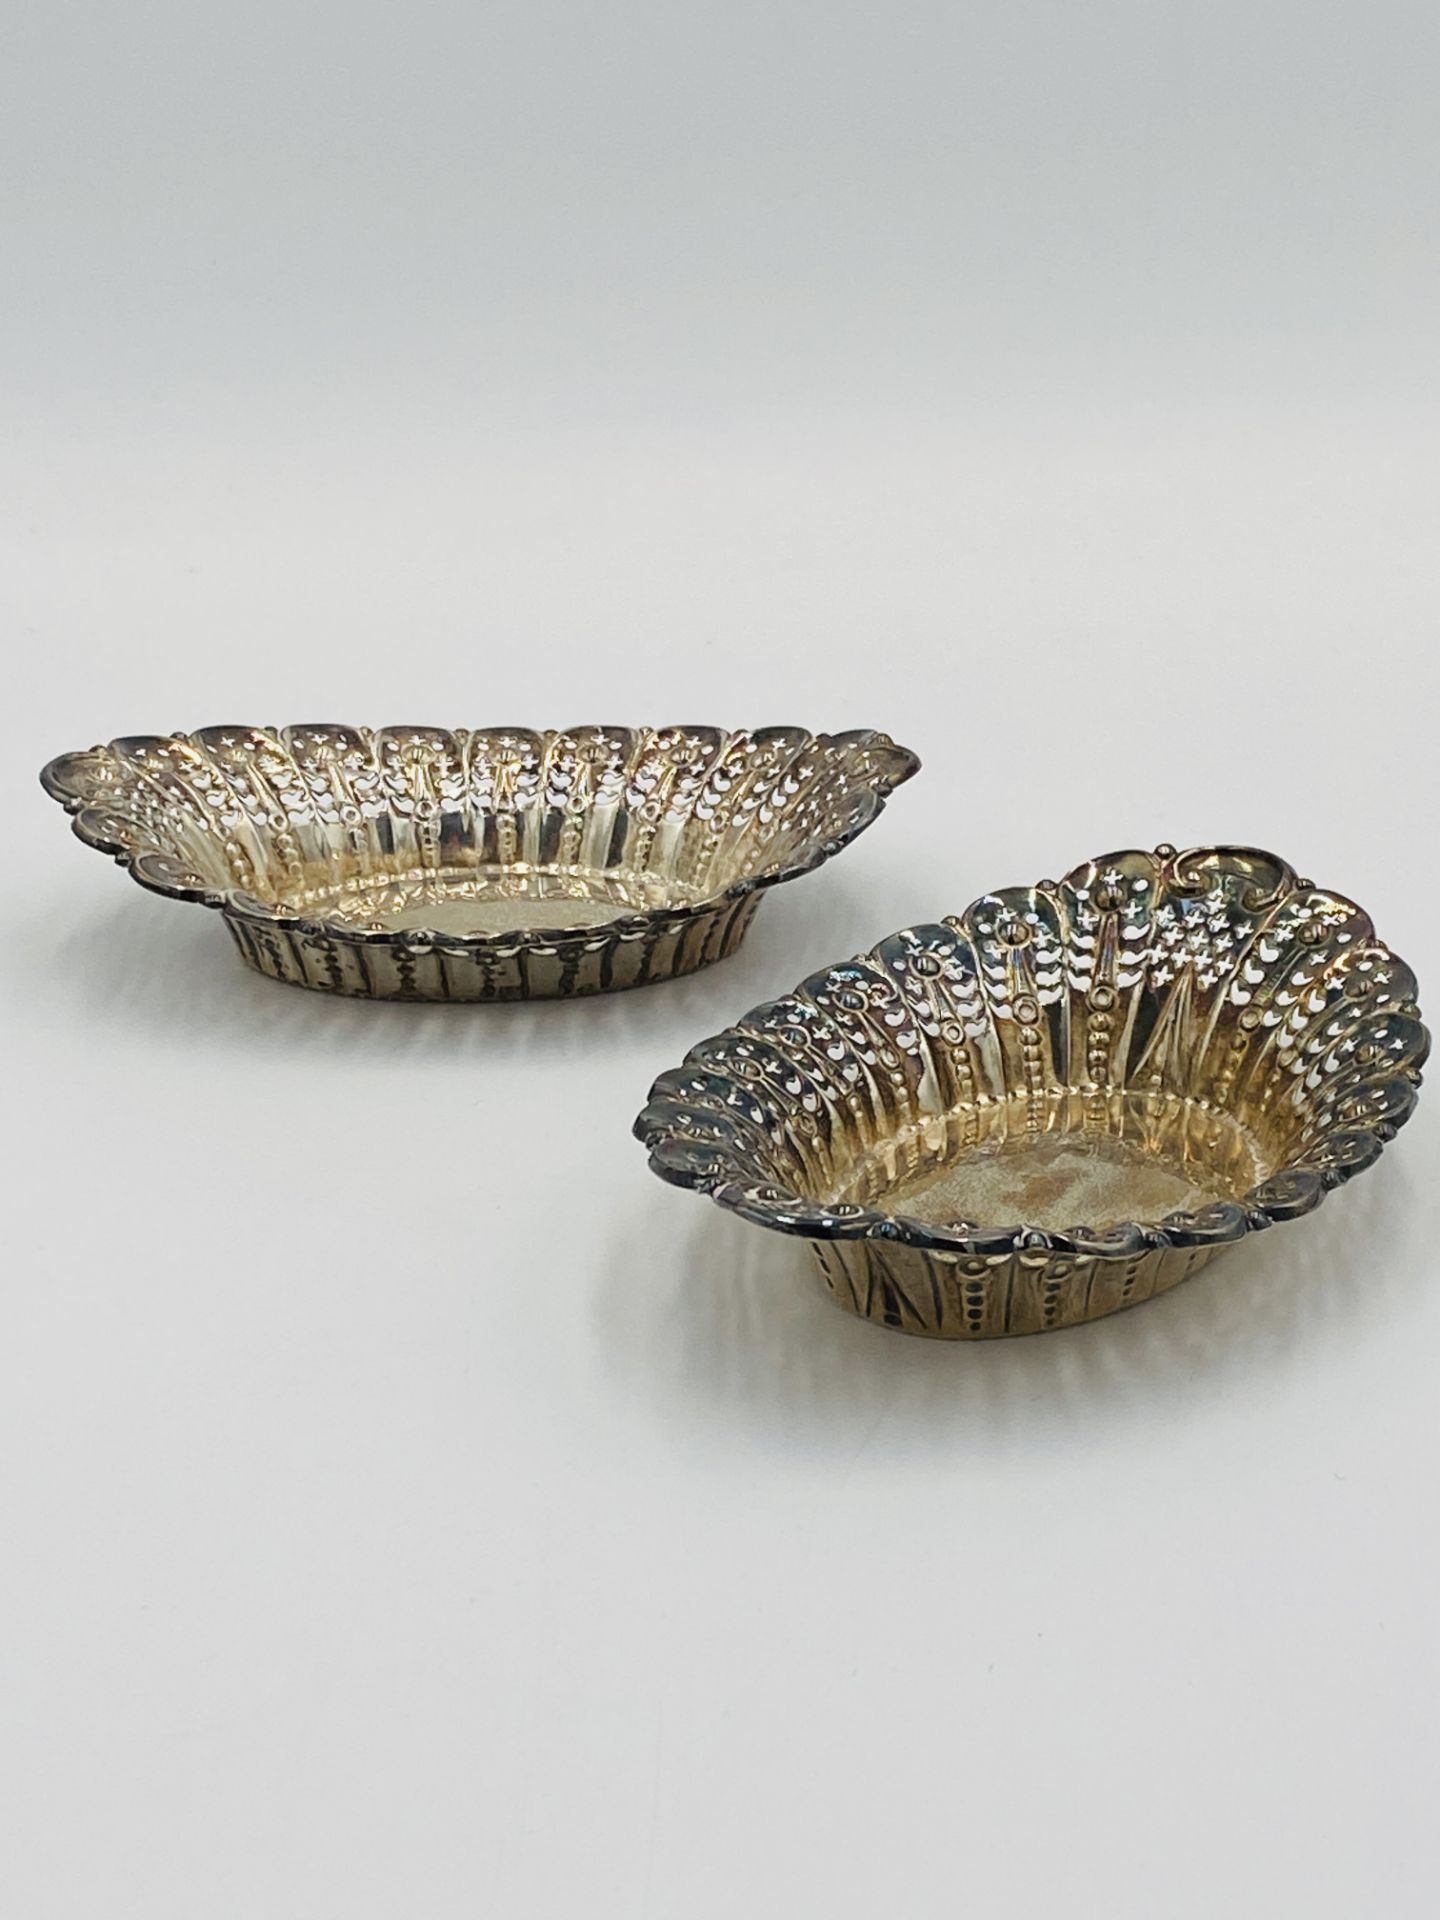 Pair of pierced silver bon bon dishes - Image 2 of 5